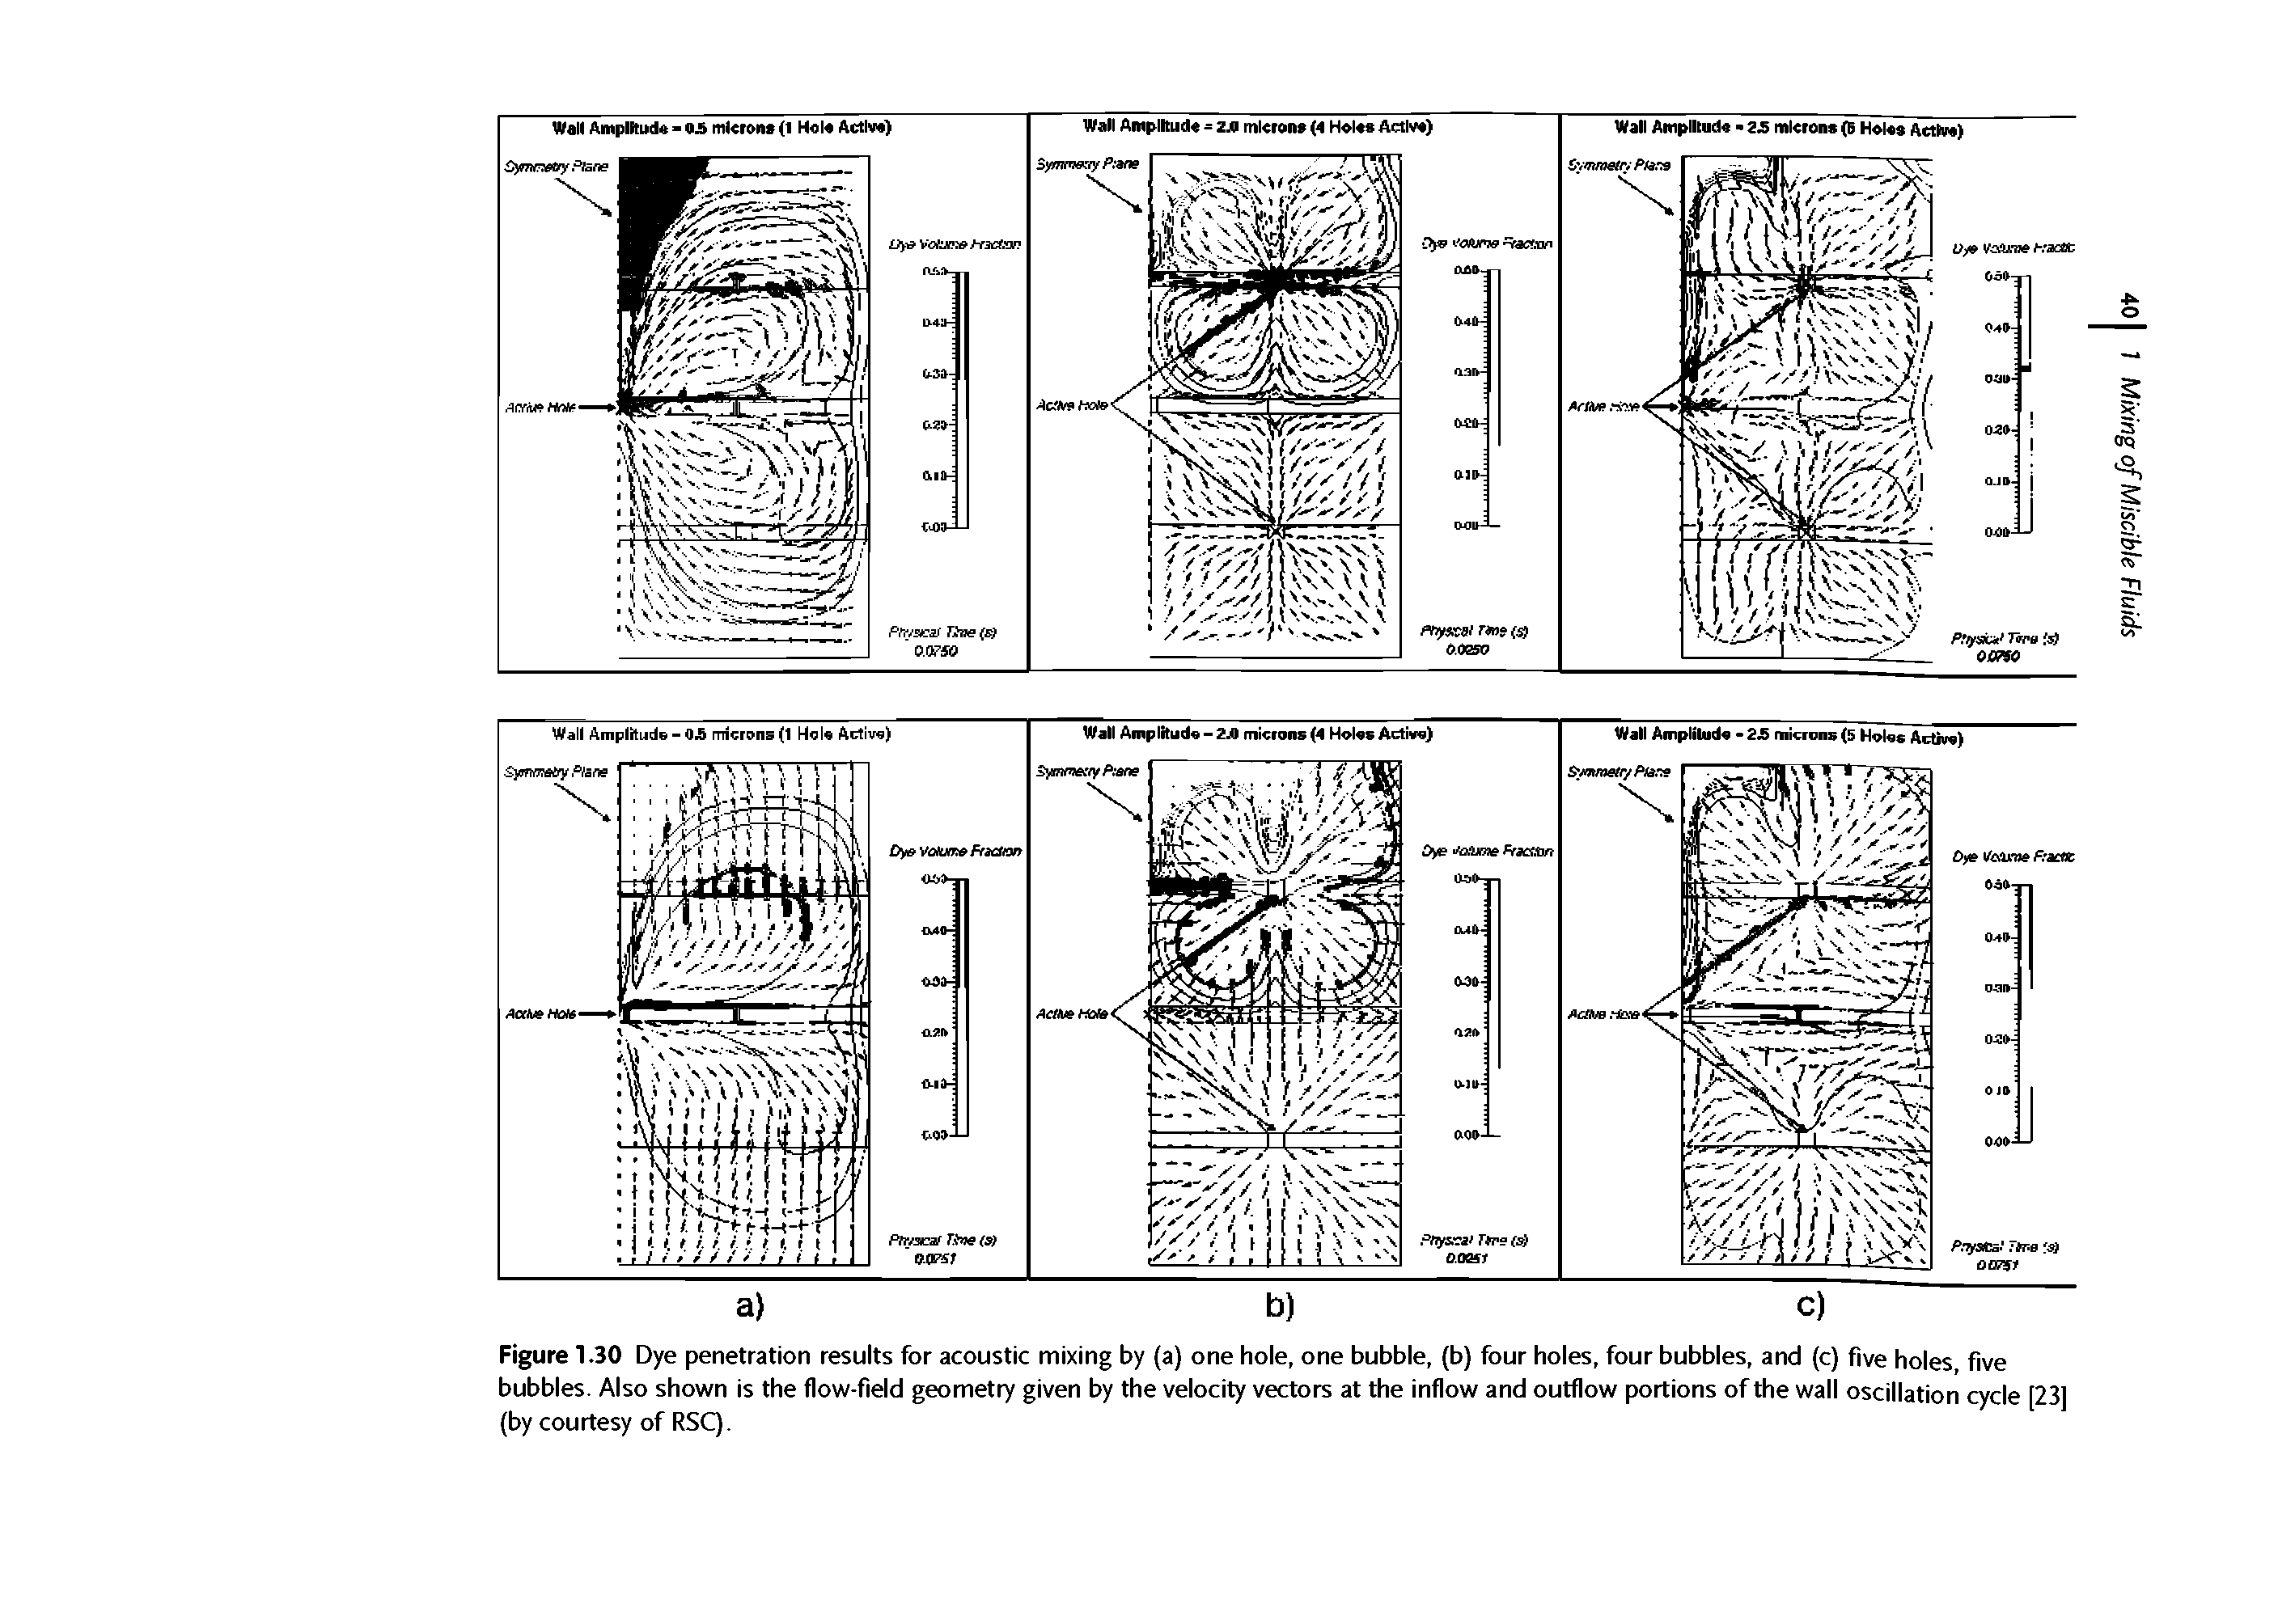 Figure 1.30 Dye penetration results for acoustic mixing by (a) one hole, one bubble, (b) four holes, four bubbles, and (c) five holes five bubbles. Also shown is the flow-field geometry given by the velocity vectors at the inflow and outflow portions of the wall oscillation cycle [23] (by courtesy of RSQ.